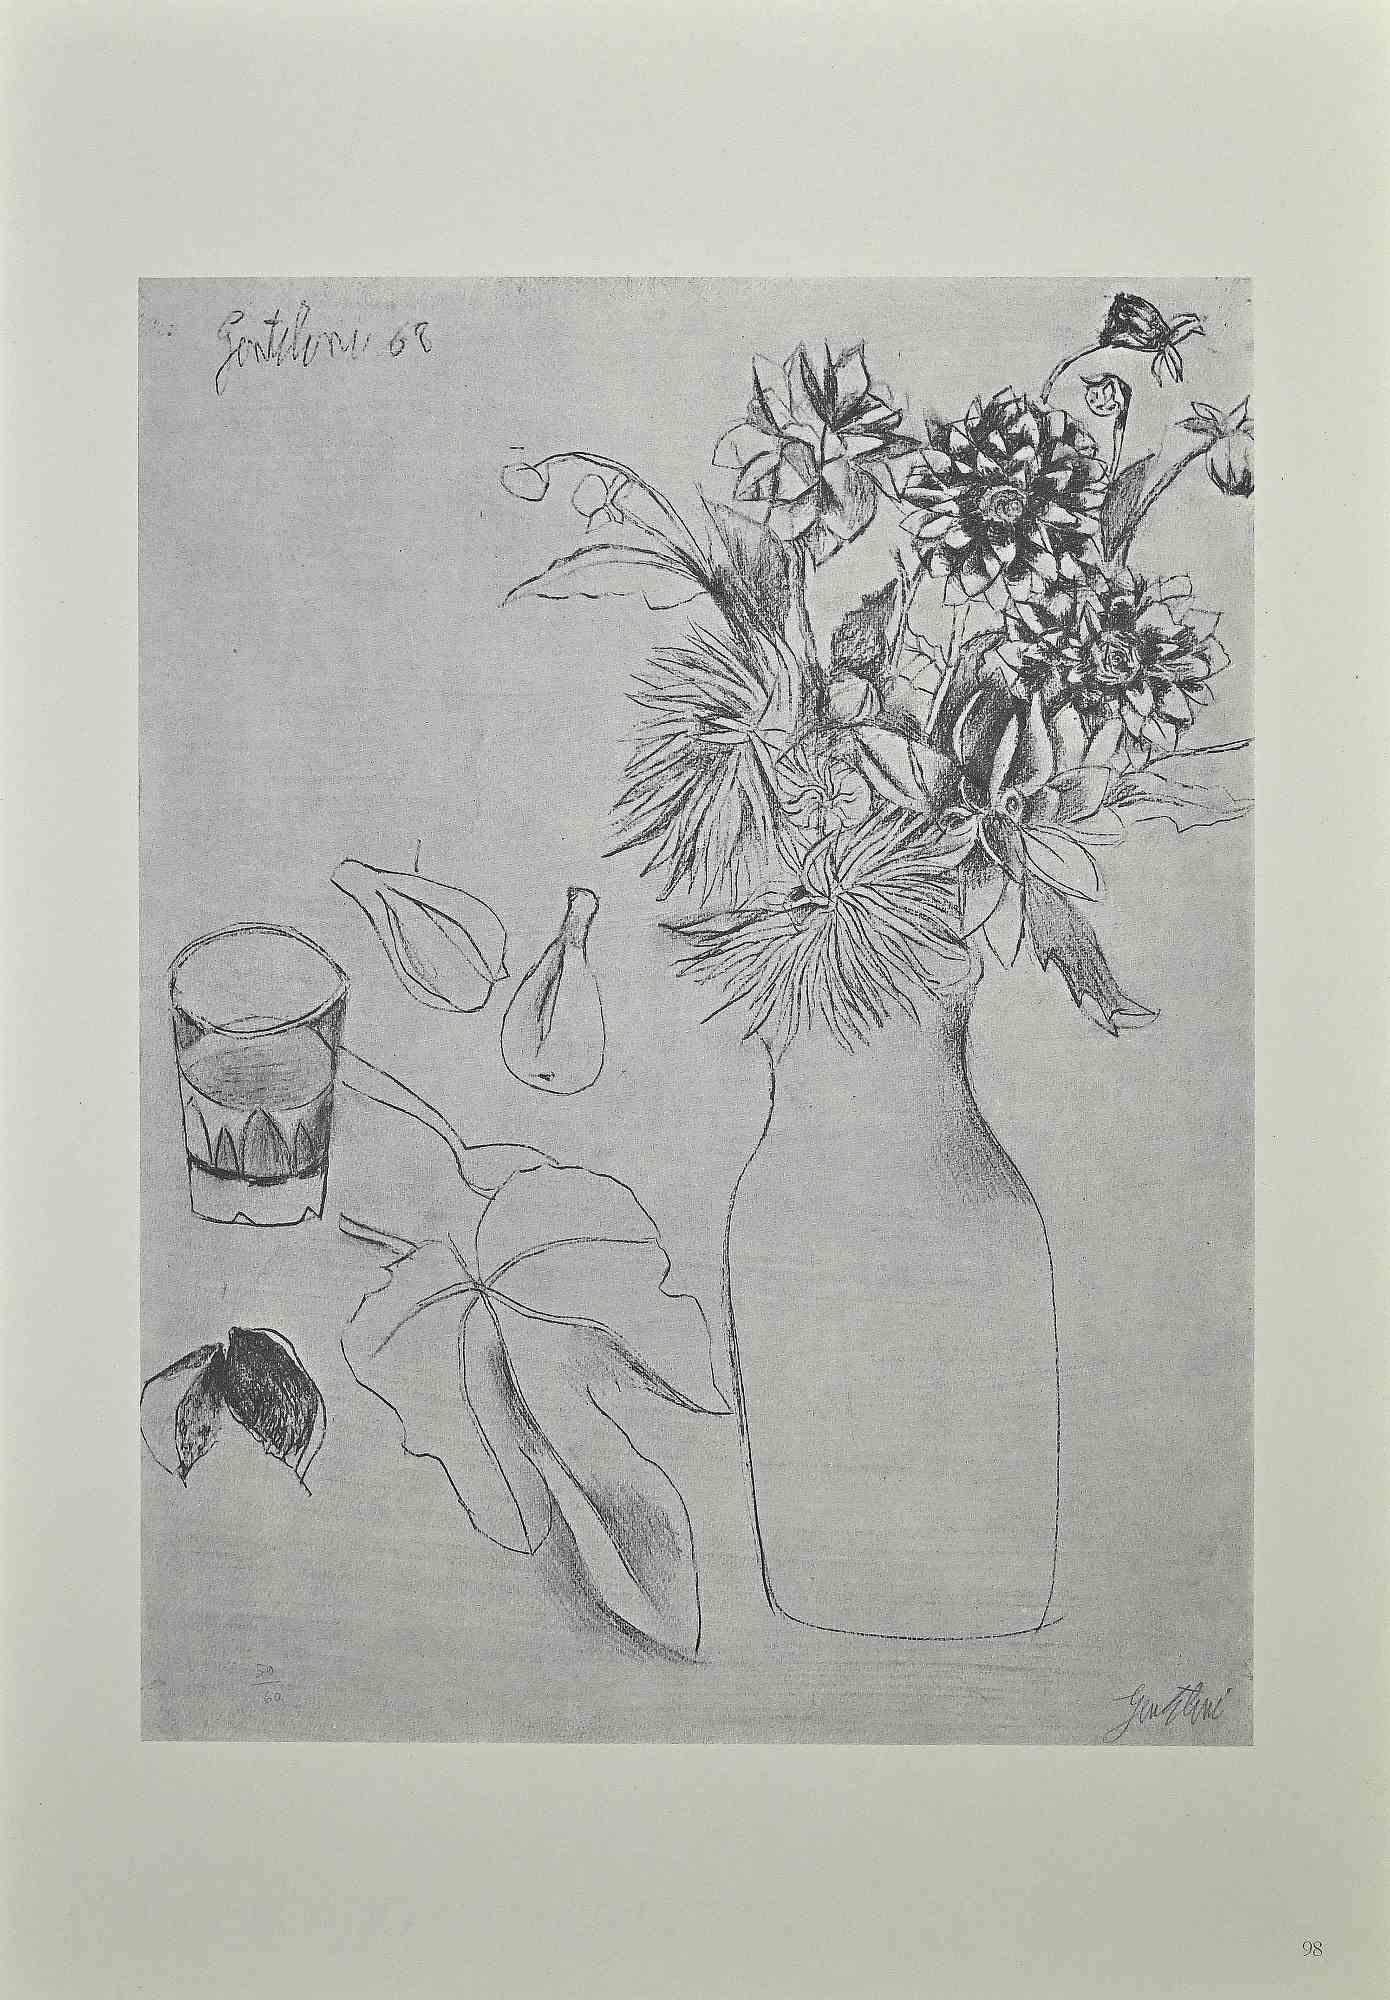 Still Life is an original vintage offset print on ivory-colored paper, realized by  Franco Gentilini ( Italian Painter, 1909-1981), in 1970s.

The state of preservation of the artwork is excellent.

Franco Gentilini ( Italian Painter, 1909-1981):